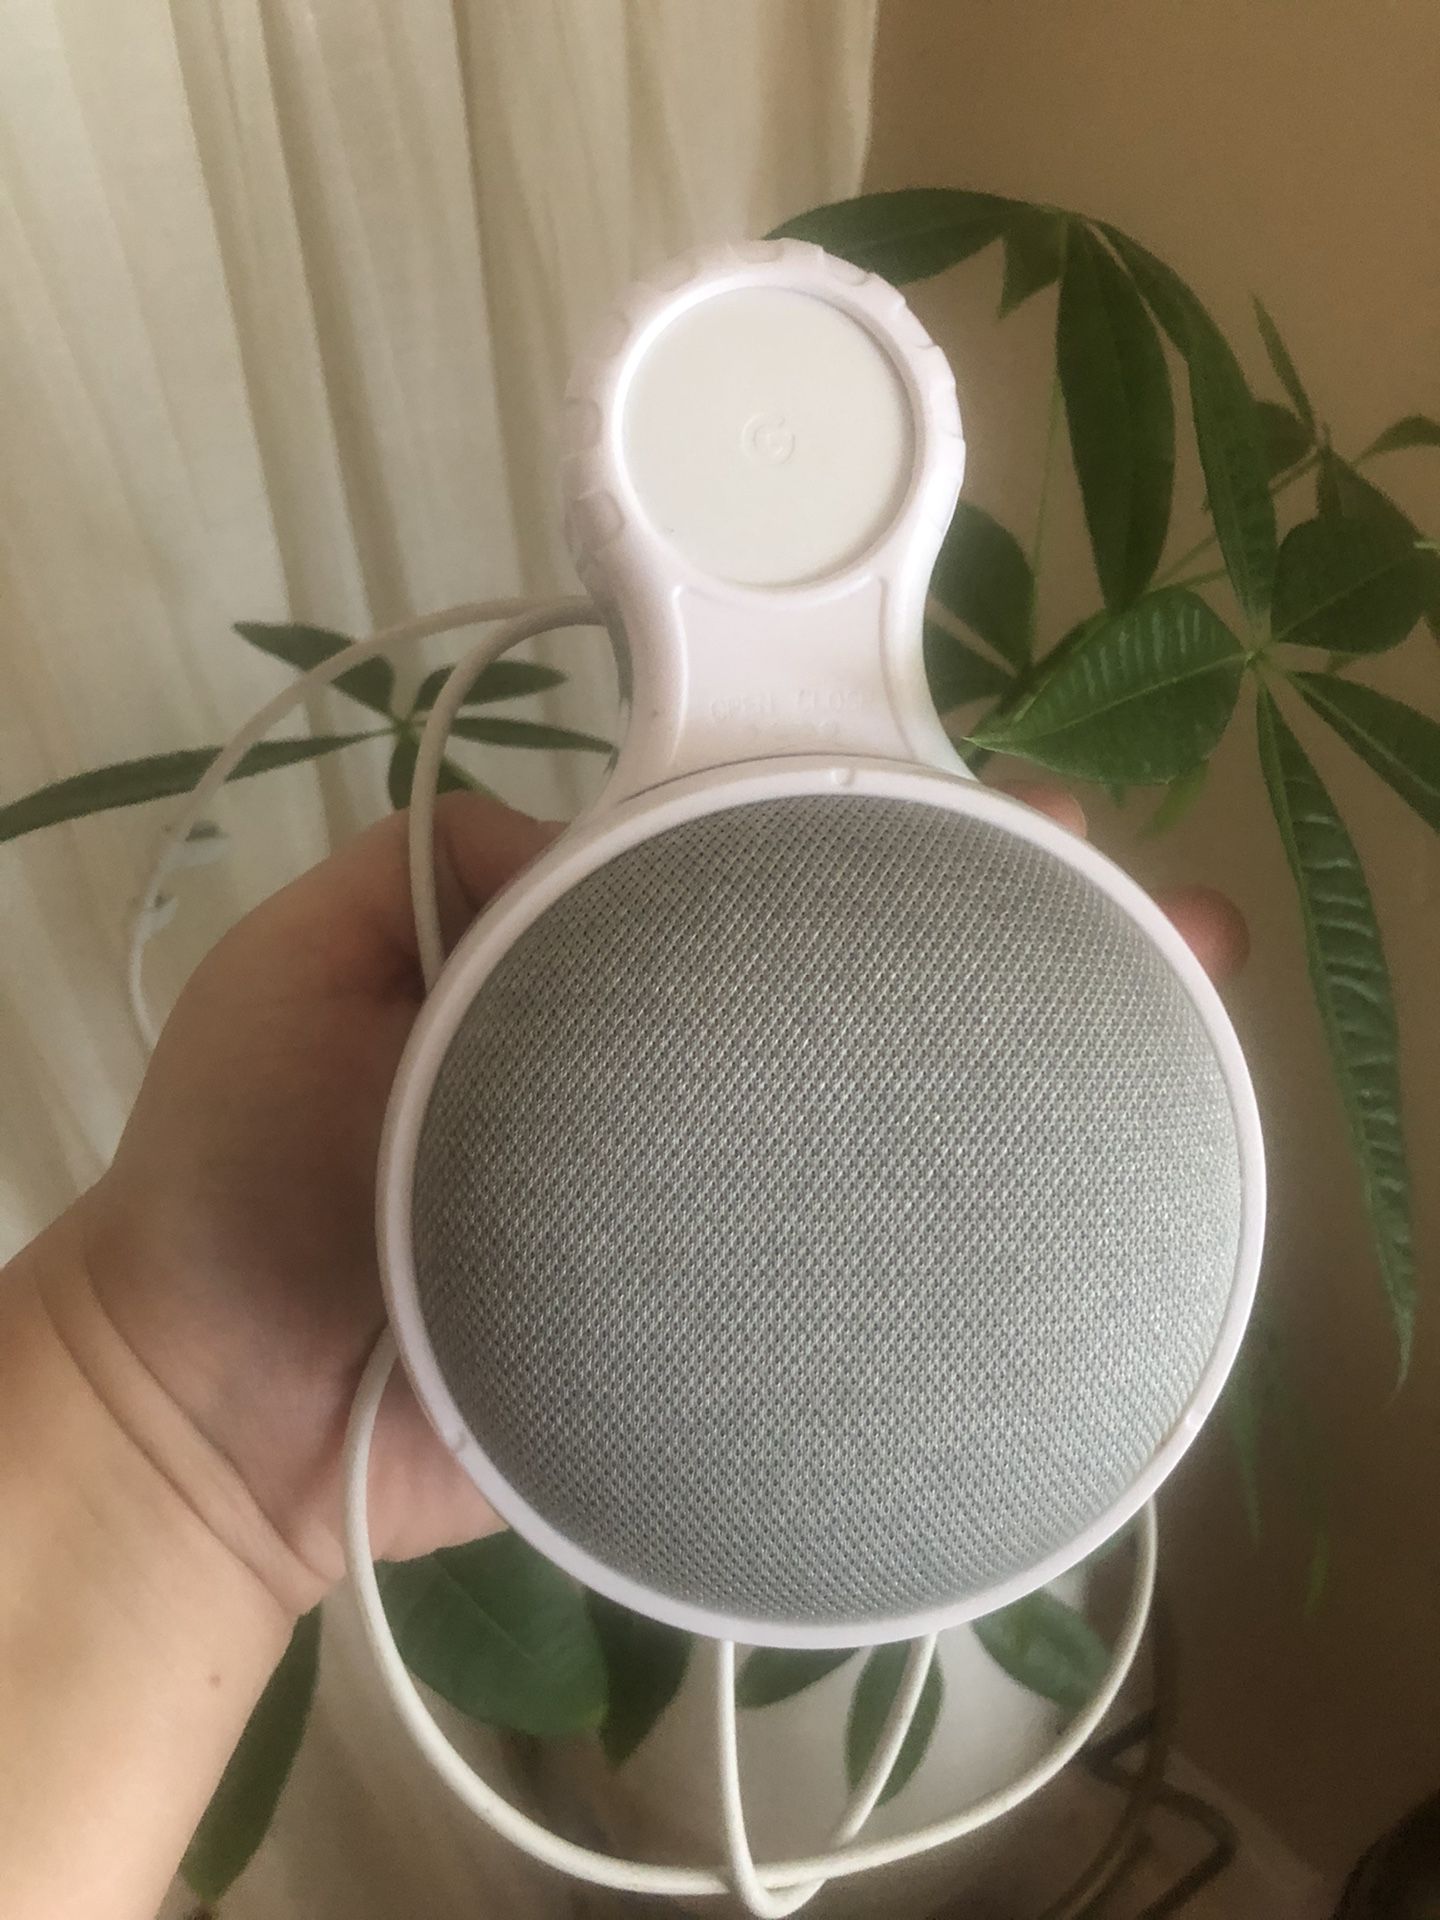 Google home With Plug In Mount